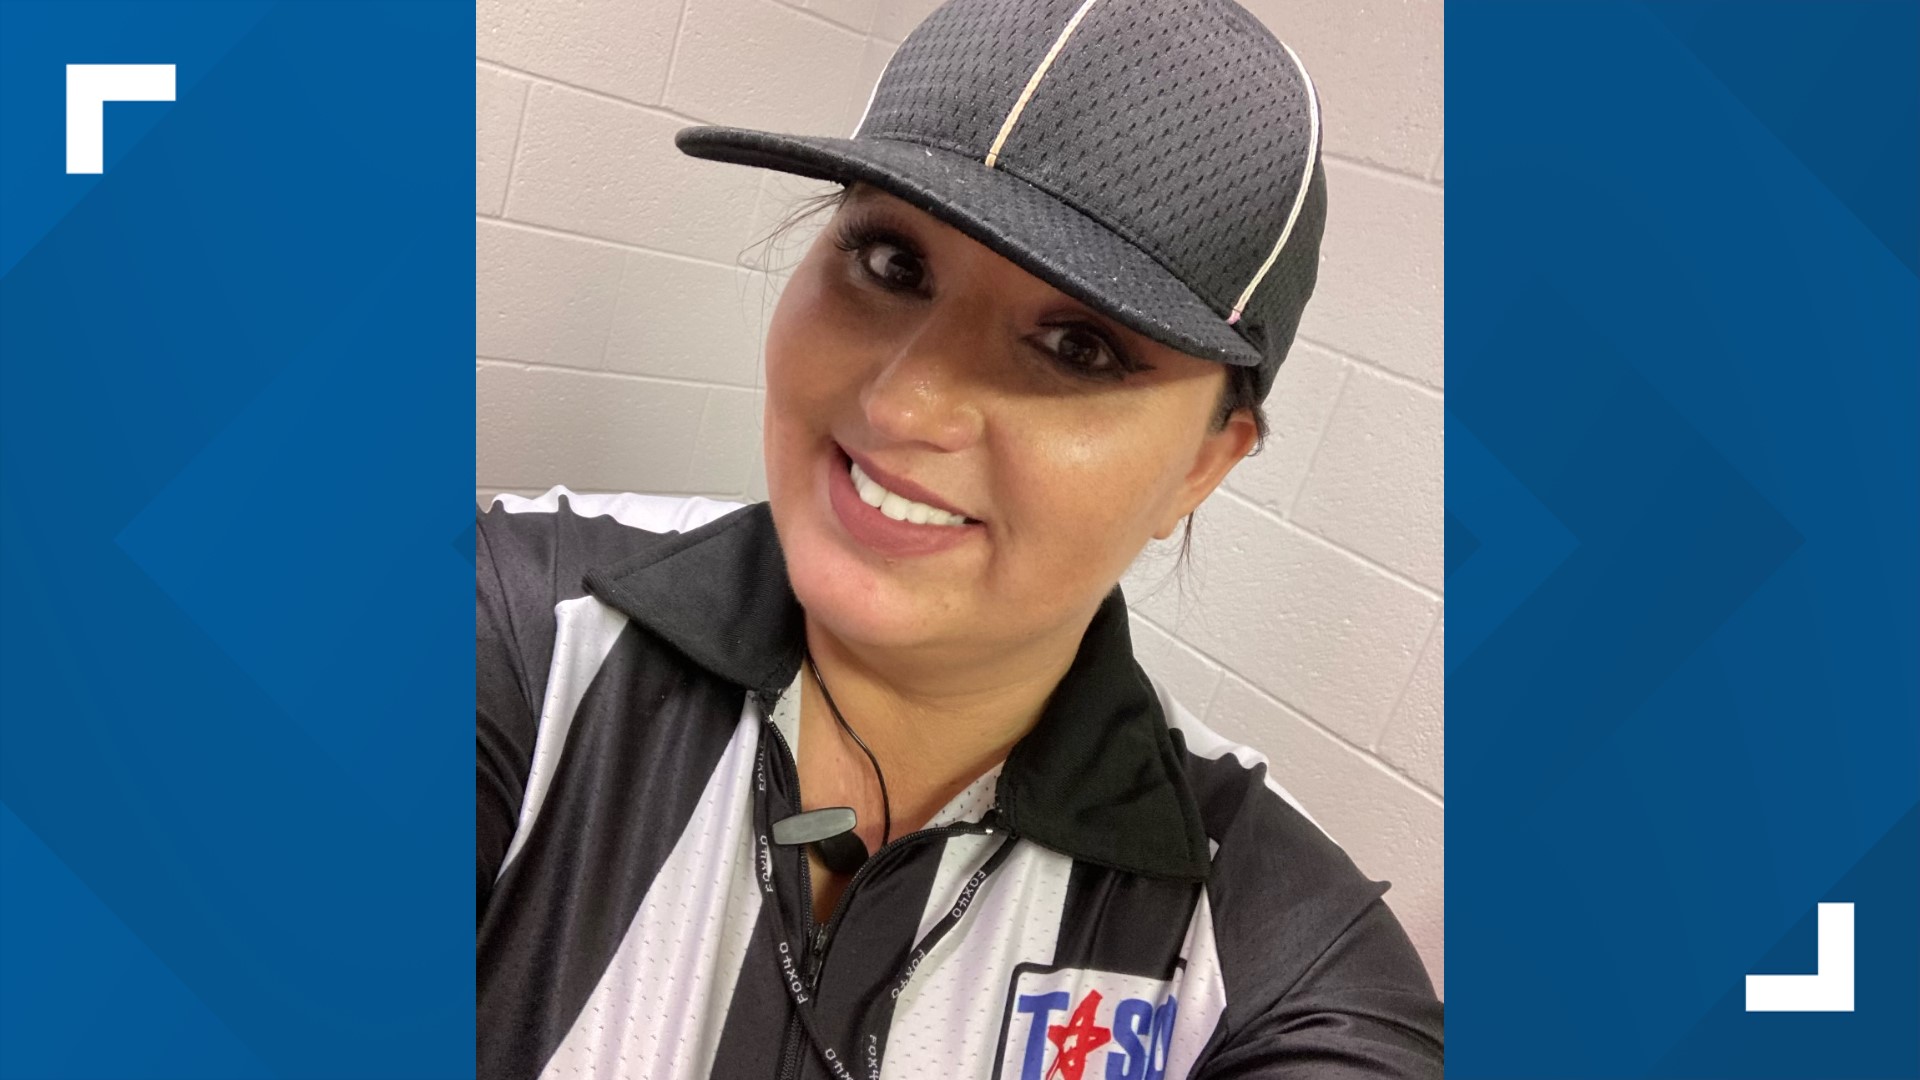 Jenifer Calhoun served on the first ever all-female officiating crew in a Texas varsity high school football game.